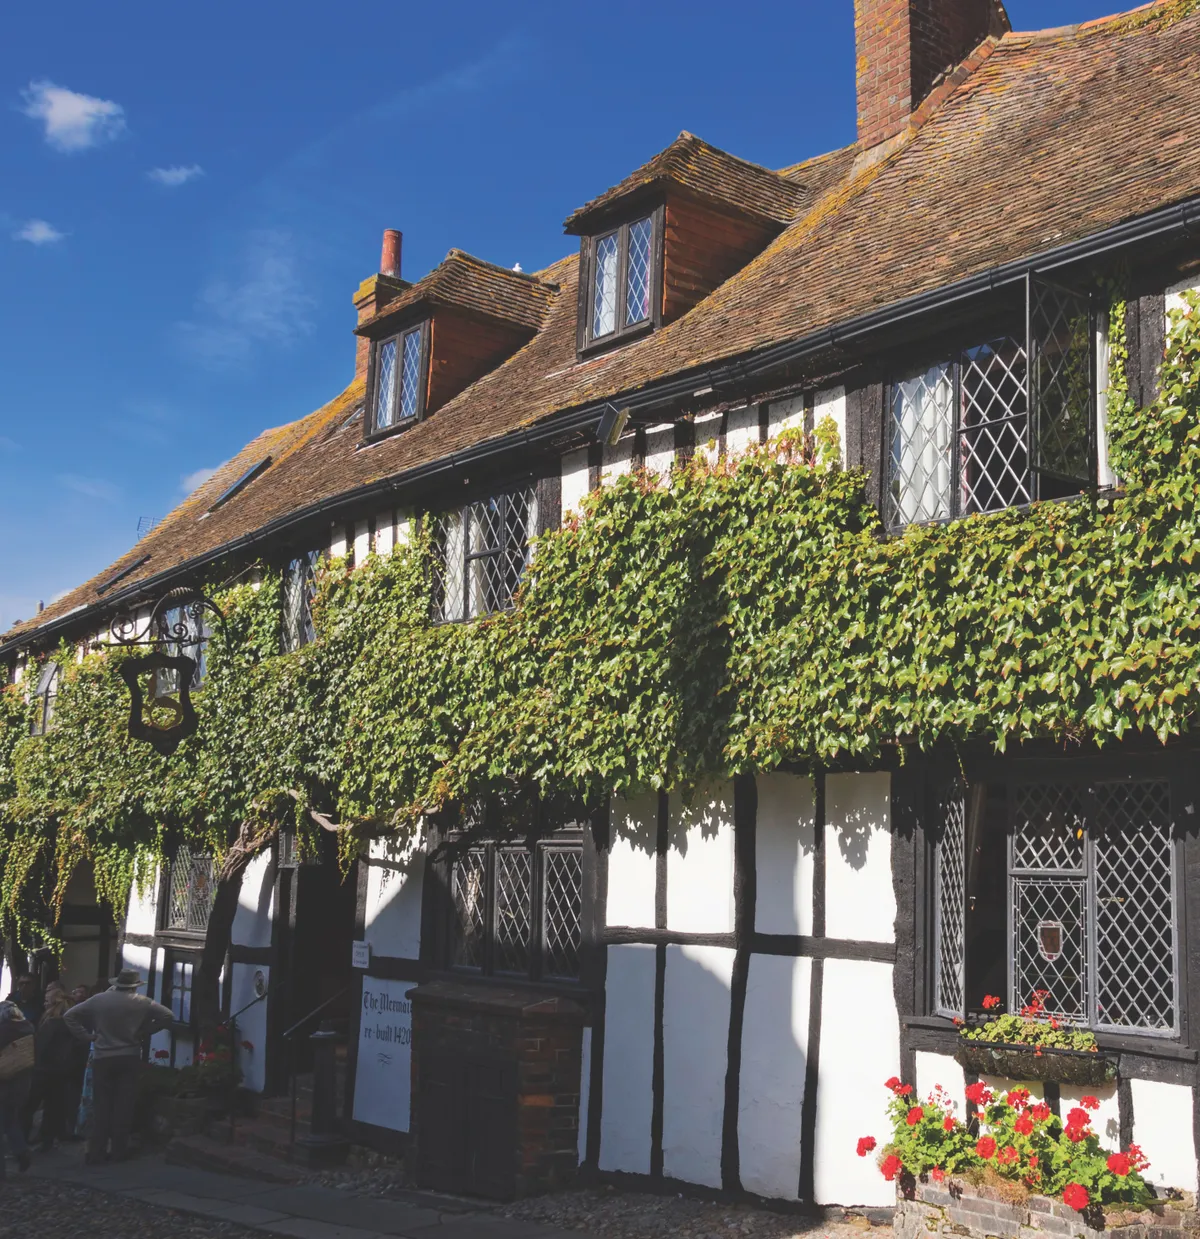 The Mermaid Inn, Rye, Sussex. Historic Inn, the current timber framed building dating from 1420, with cellars built in 1156. The inn was used by a notorious gang of smugglers during the 18th century.